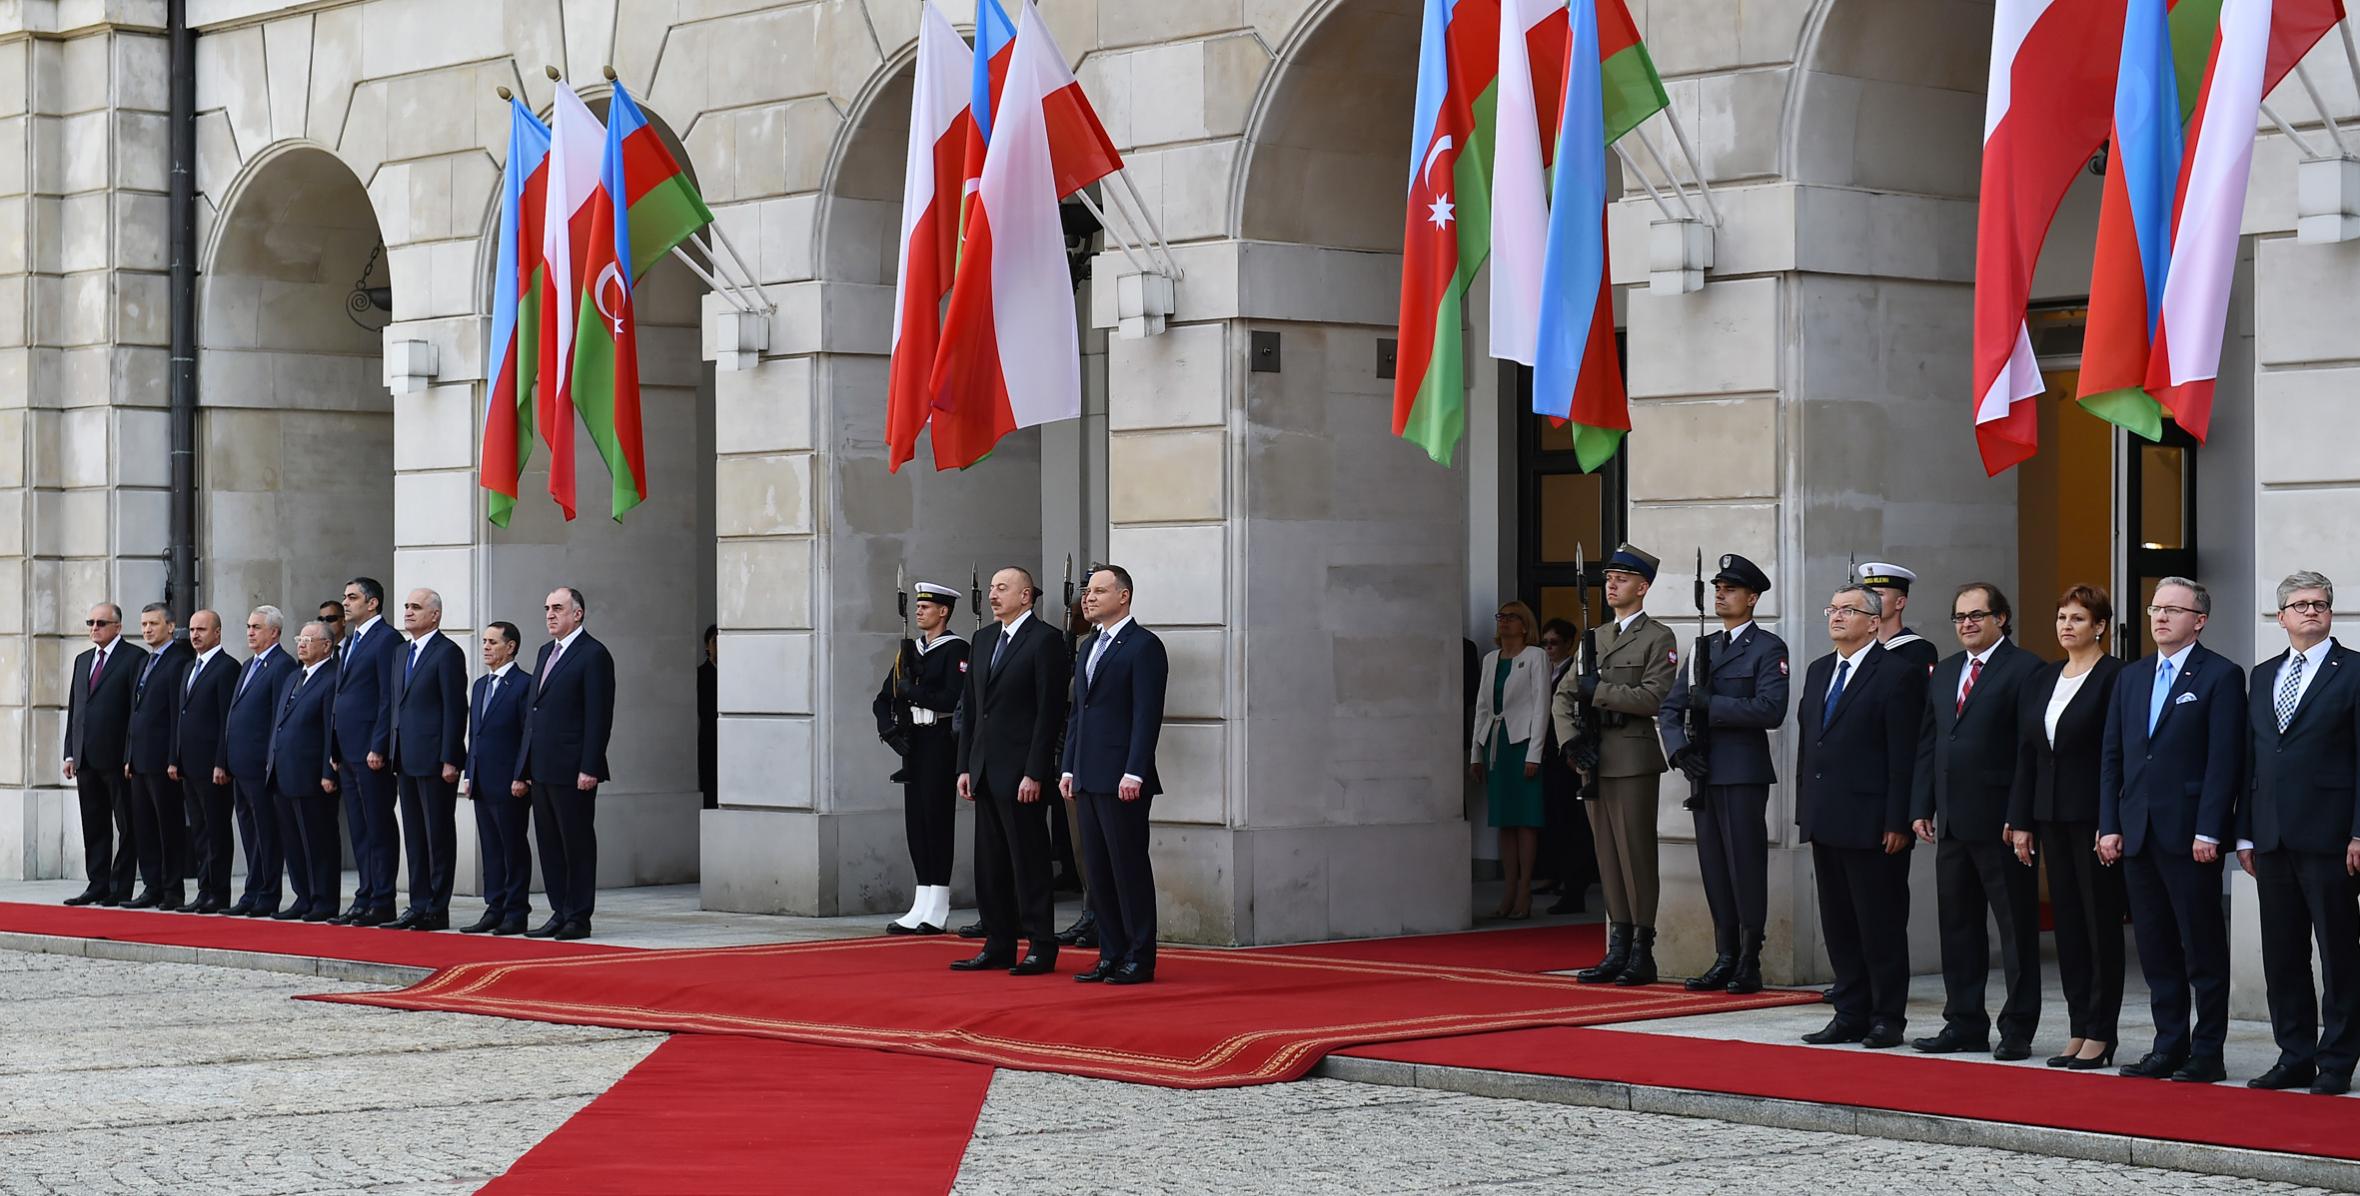 Official welcome ceremony was held for Ilham Aliyev in Warsaw